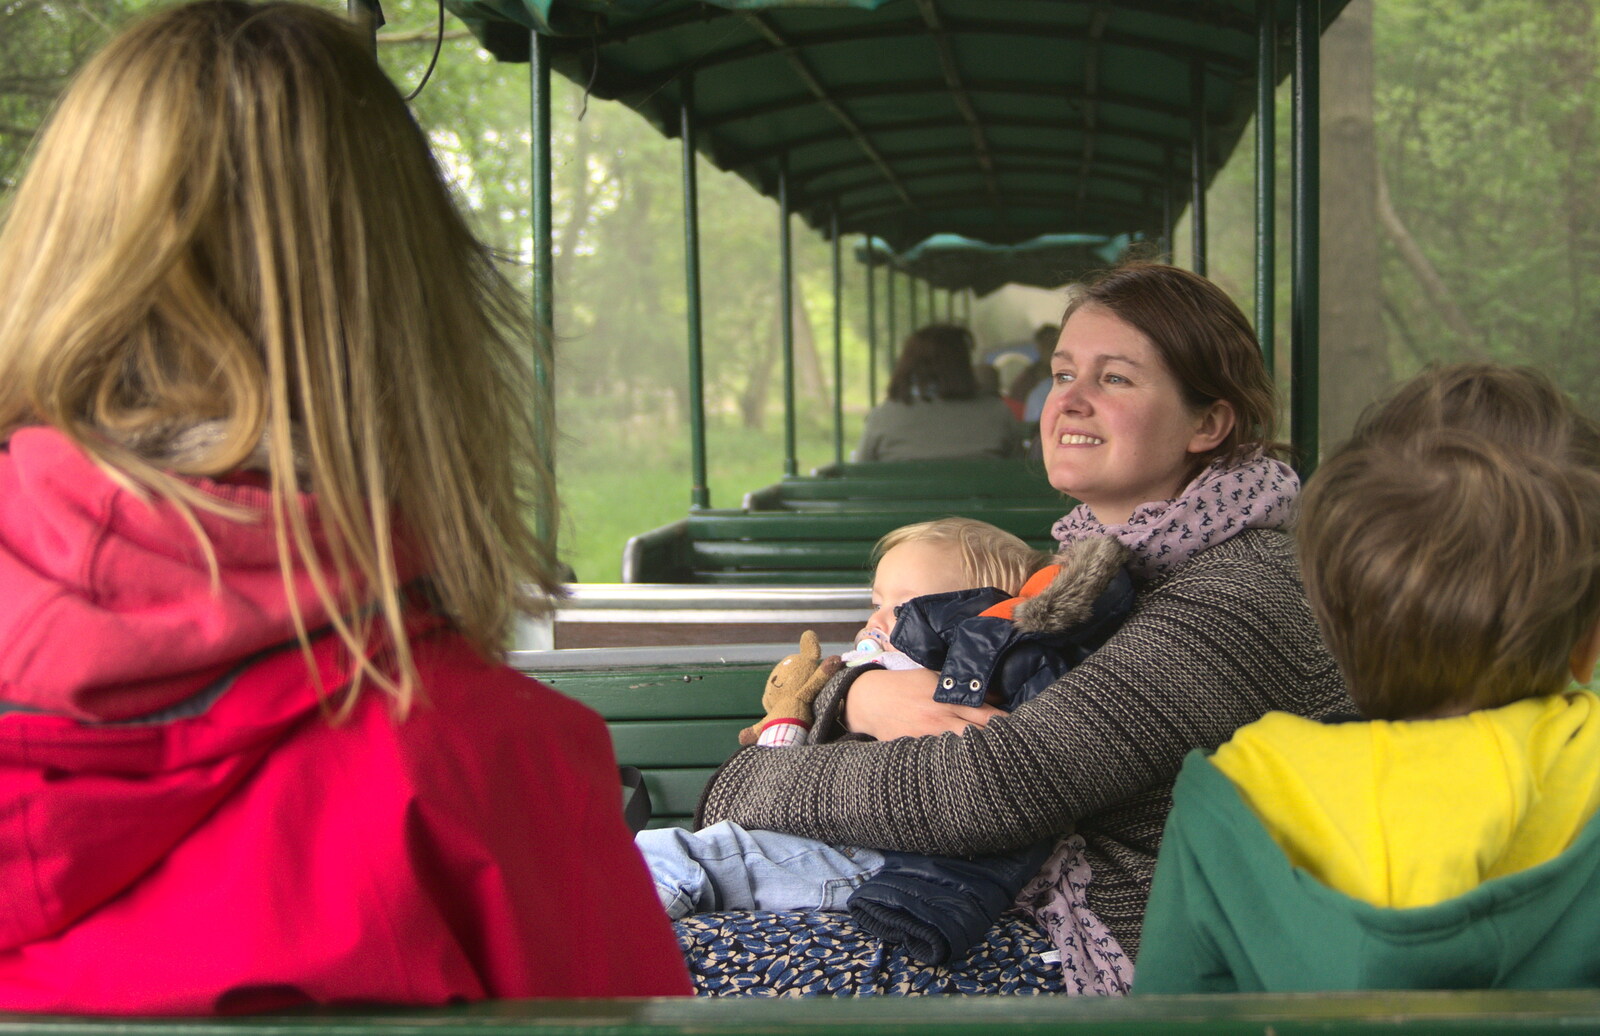 Isobel and Baby Gabey on the train from A Day at Bressingham Steam and Gardens, Diss, Norfolk - 18th May 2013